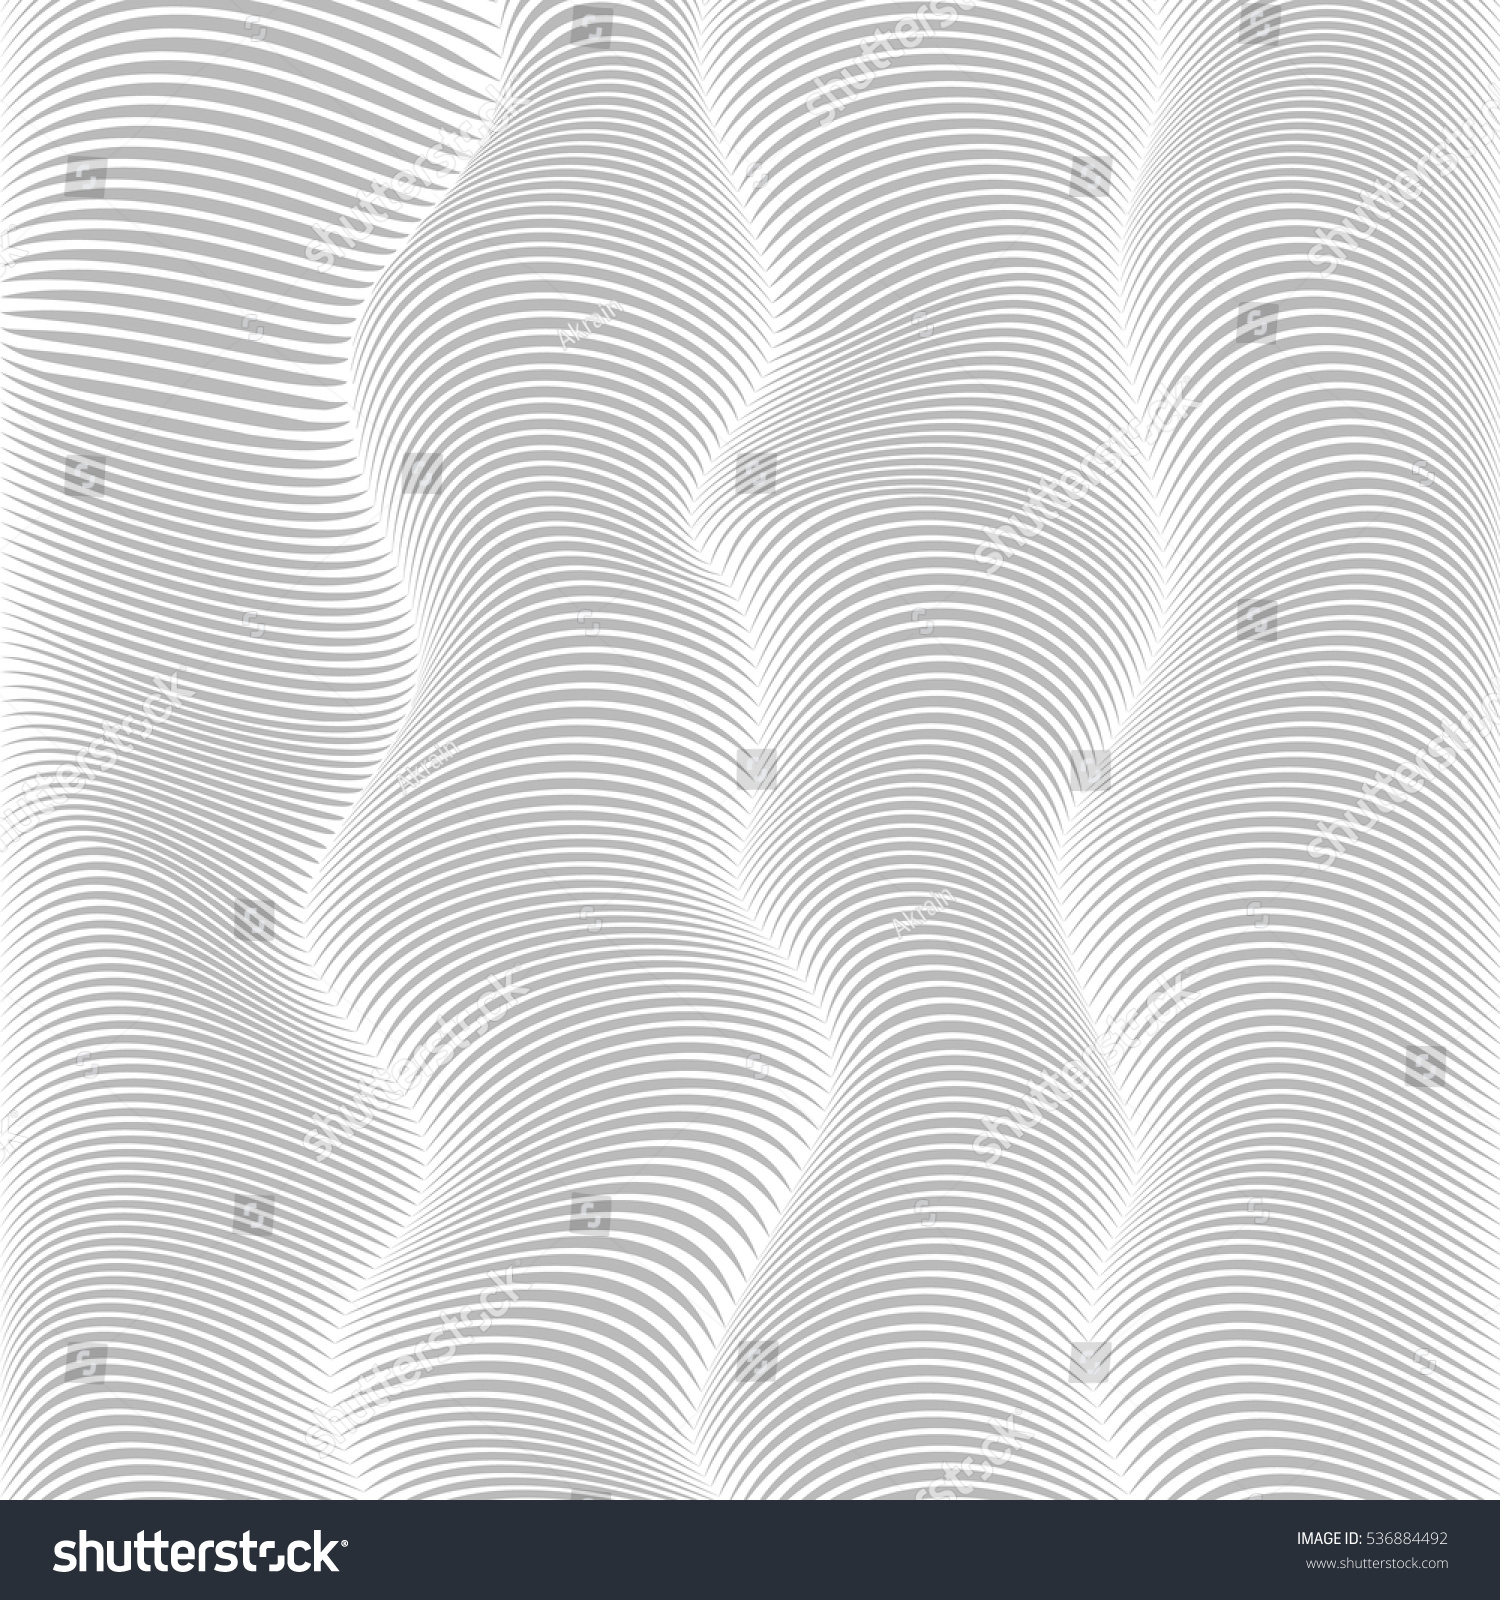 Abstract Background Gray Distorted Lines Illusion Stock Vector